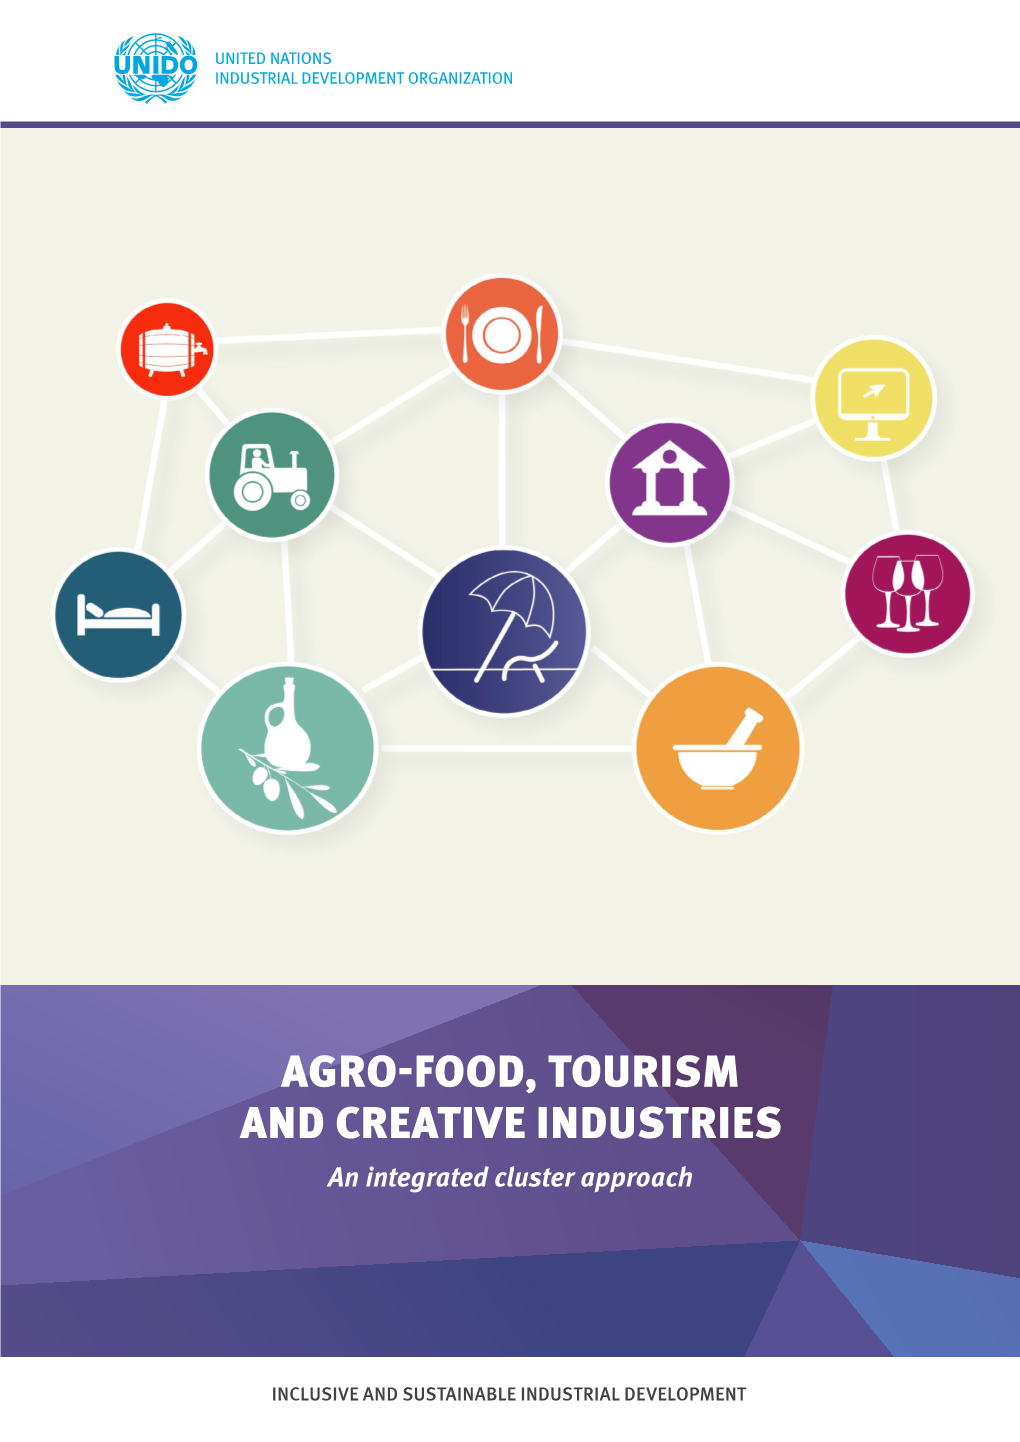 AGRO-FOOD, TOURISM and CREATIVE INDUSTRIES an Integrated Cluster Approach